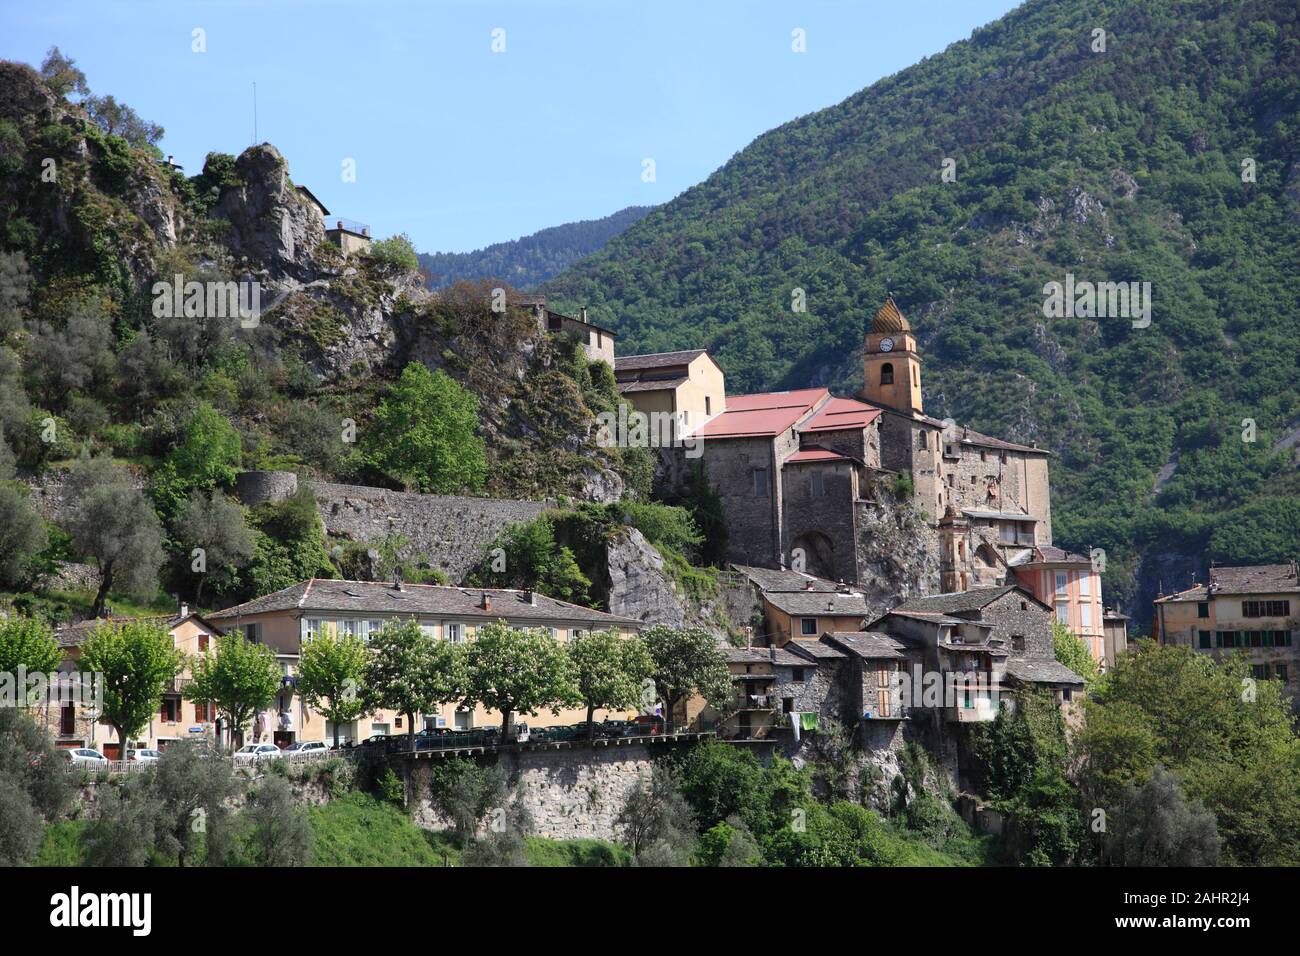 Saorge, Perched Medieval Village, Roya Valley, Alpes-Maritimes, Cote d'Azur, French Riviera, Provence, France, Europe Stock Photo